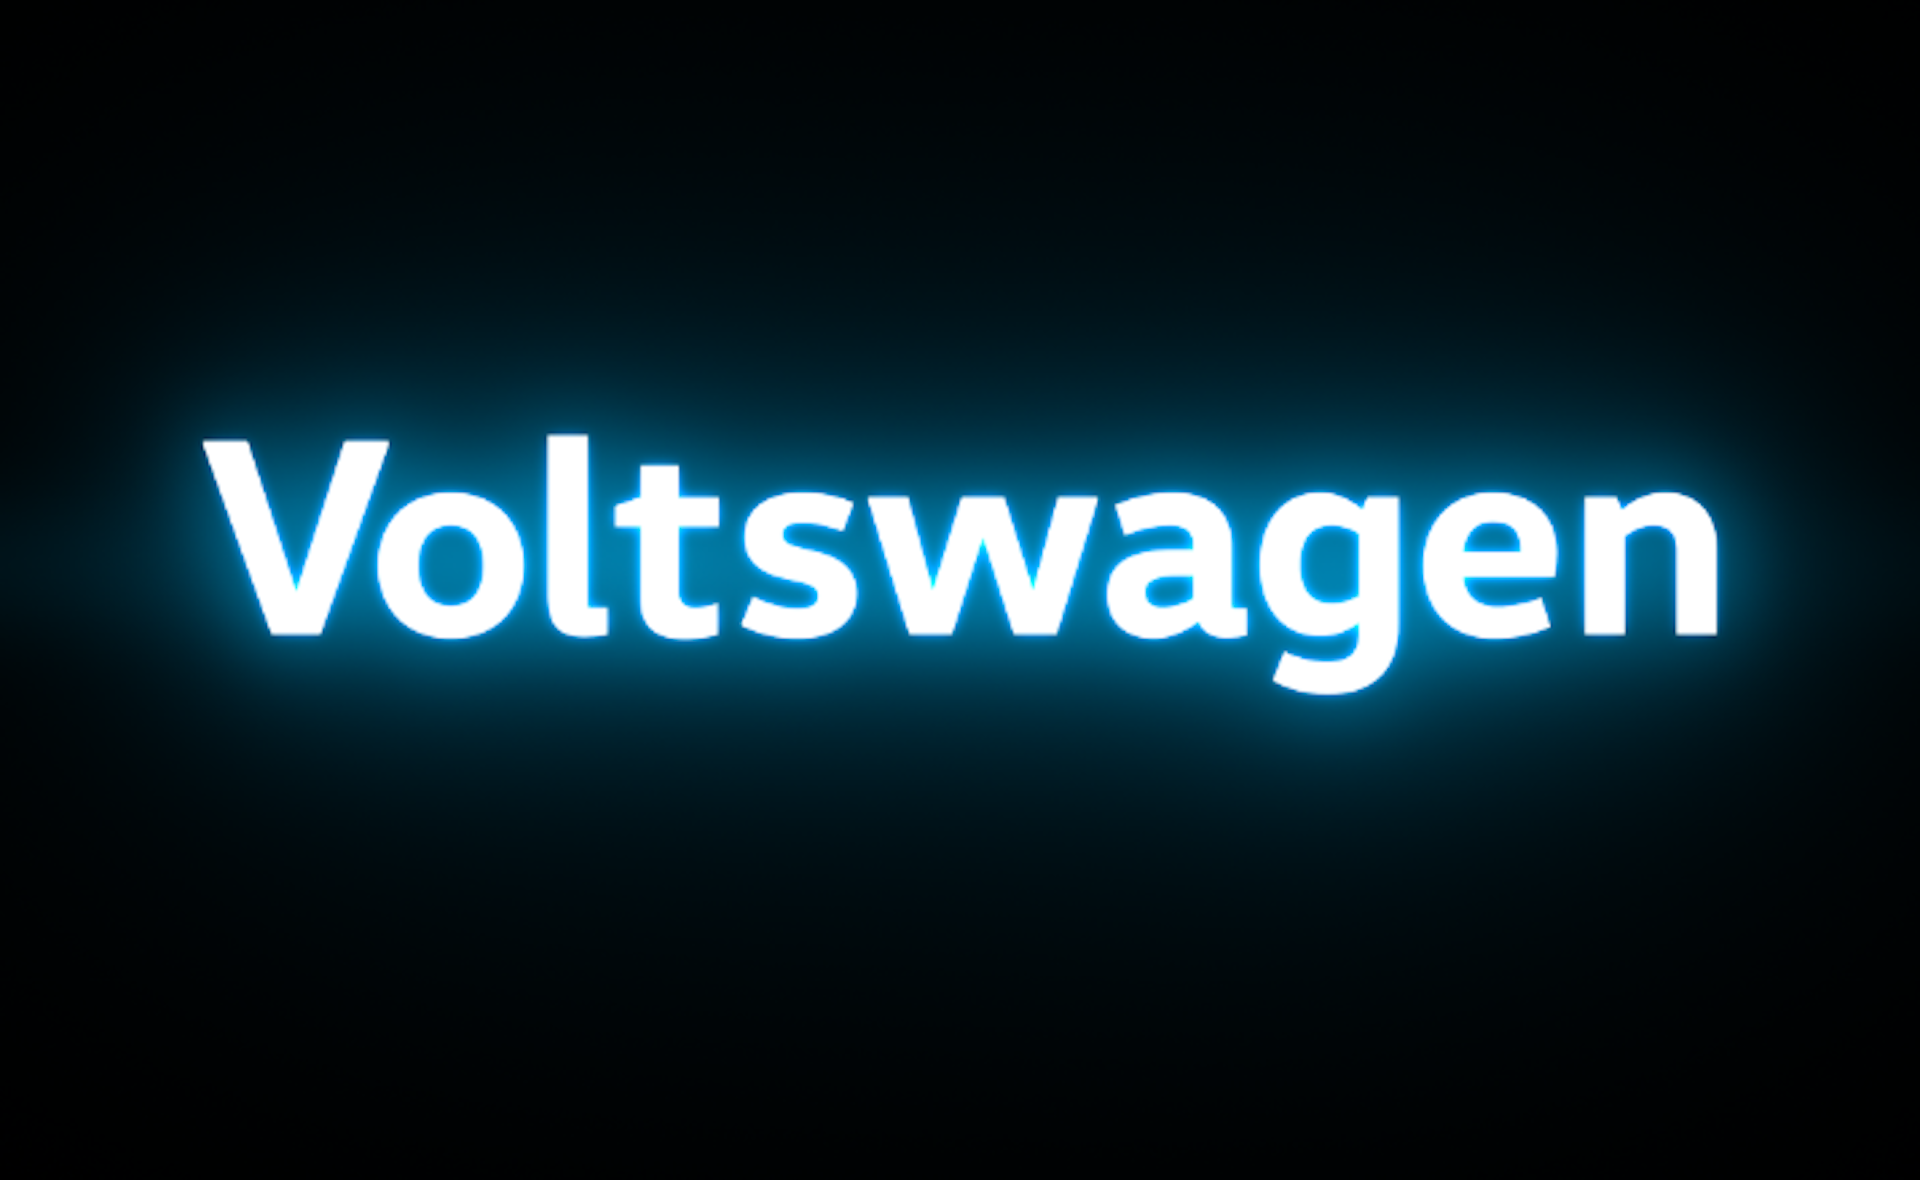 VW Says It’s Officially Doing the ‘Voltswagen’ Name for EVs Only (Update: No It’s Not, It’s A Bad Joke)